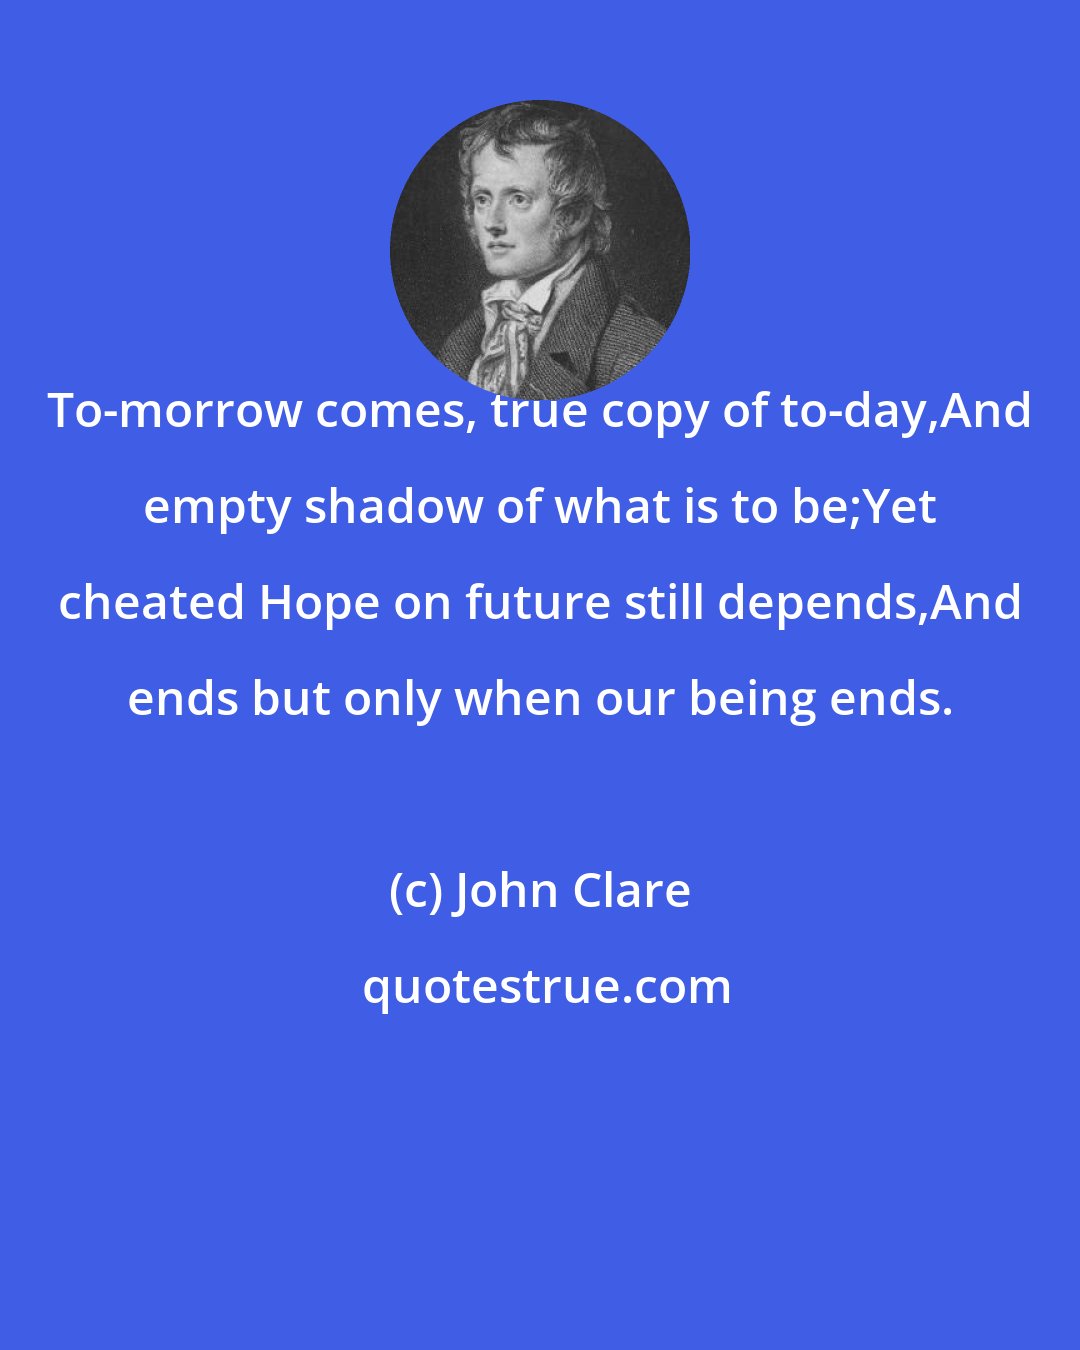 John Clare: To-morrow comes, true copy of to-day,And empty shadow of what is to be;Yet cheated Hope on future still depends,And ends but only when our being ends.